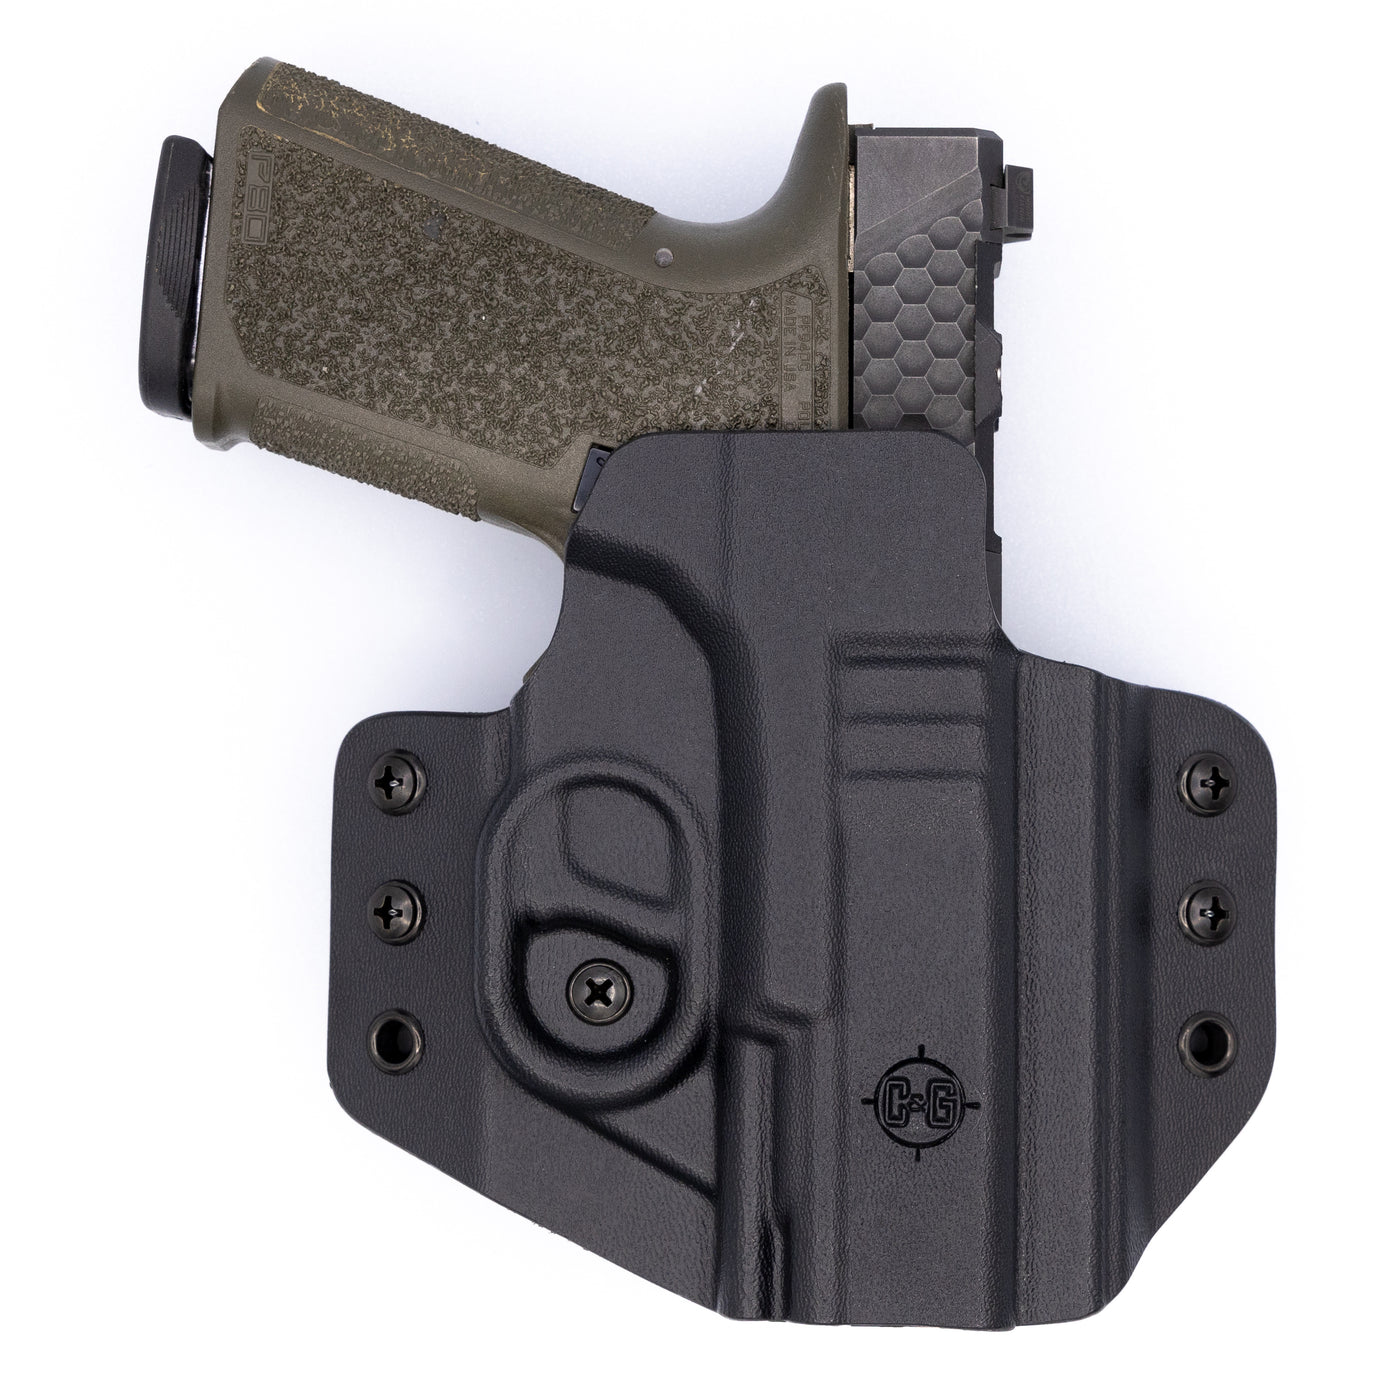 C&G Holsters OWB Outside the waistband Holster for the Polymer80 Poly80 PF9/40v2 PF9/40c in holstered position